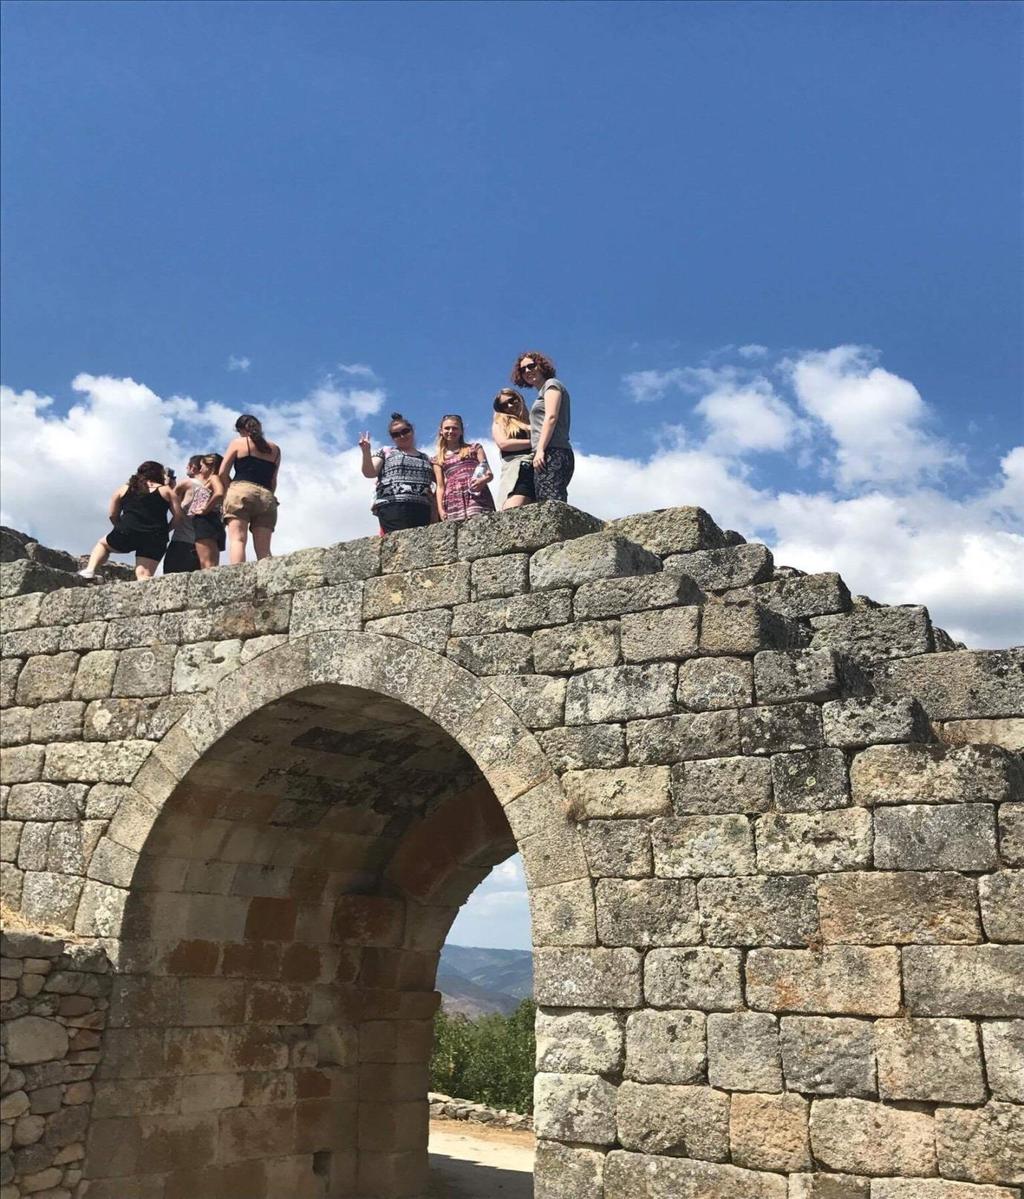 Photograph of Castelo de Numão with students hiking up the walls Photo description: On this particular outing it was a good idea to bring hiking shoes rather than sneakers.